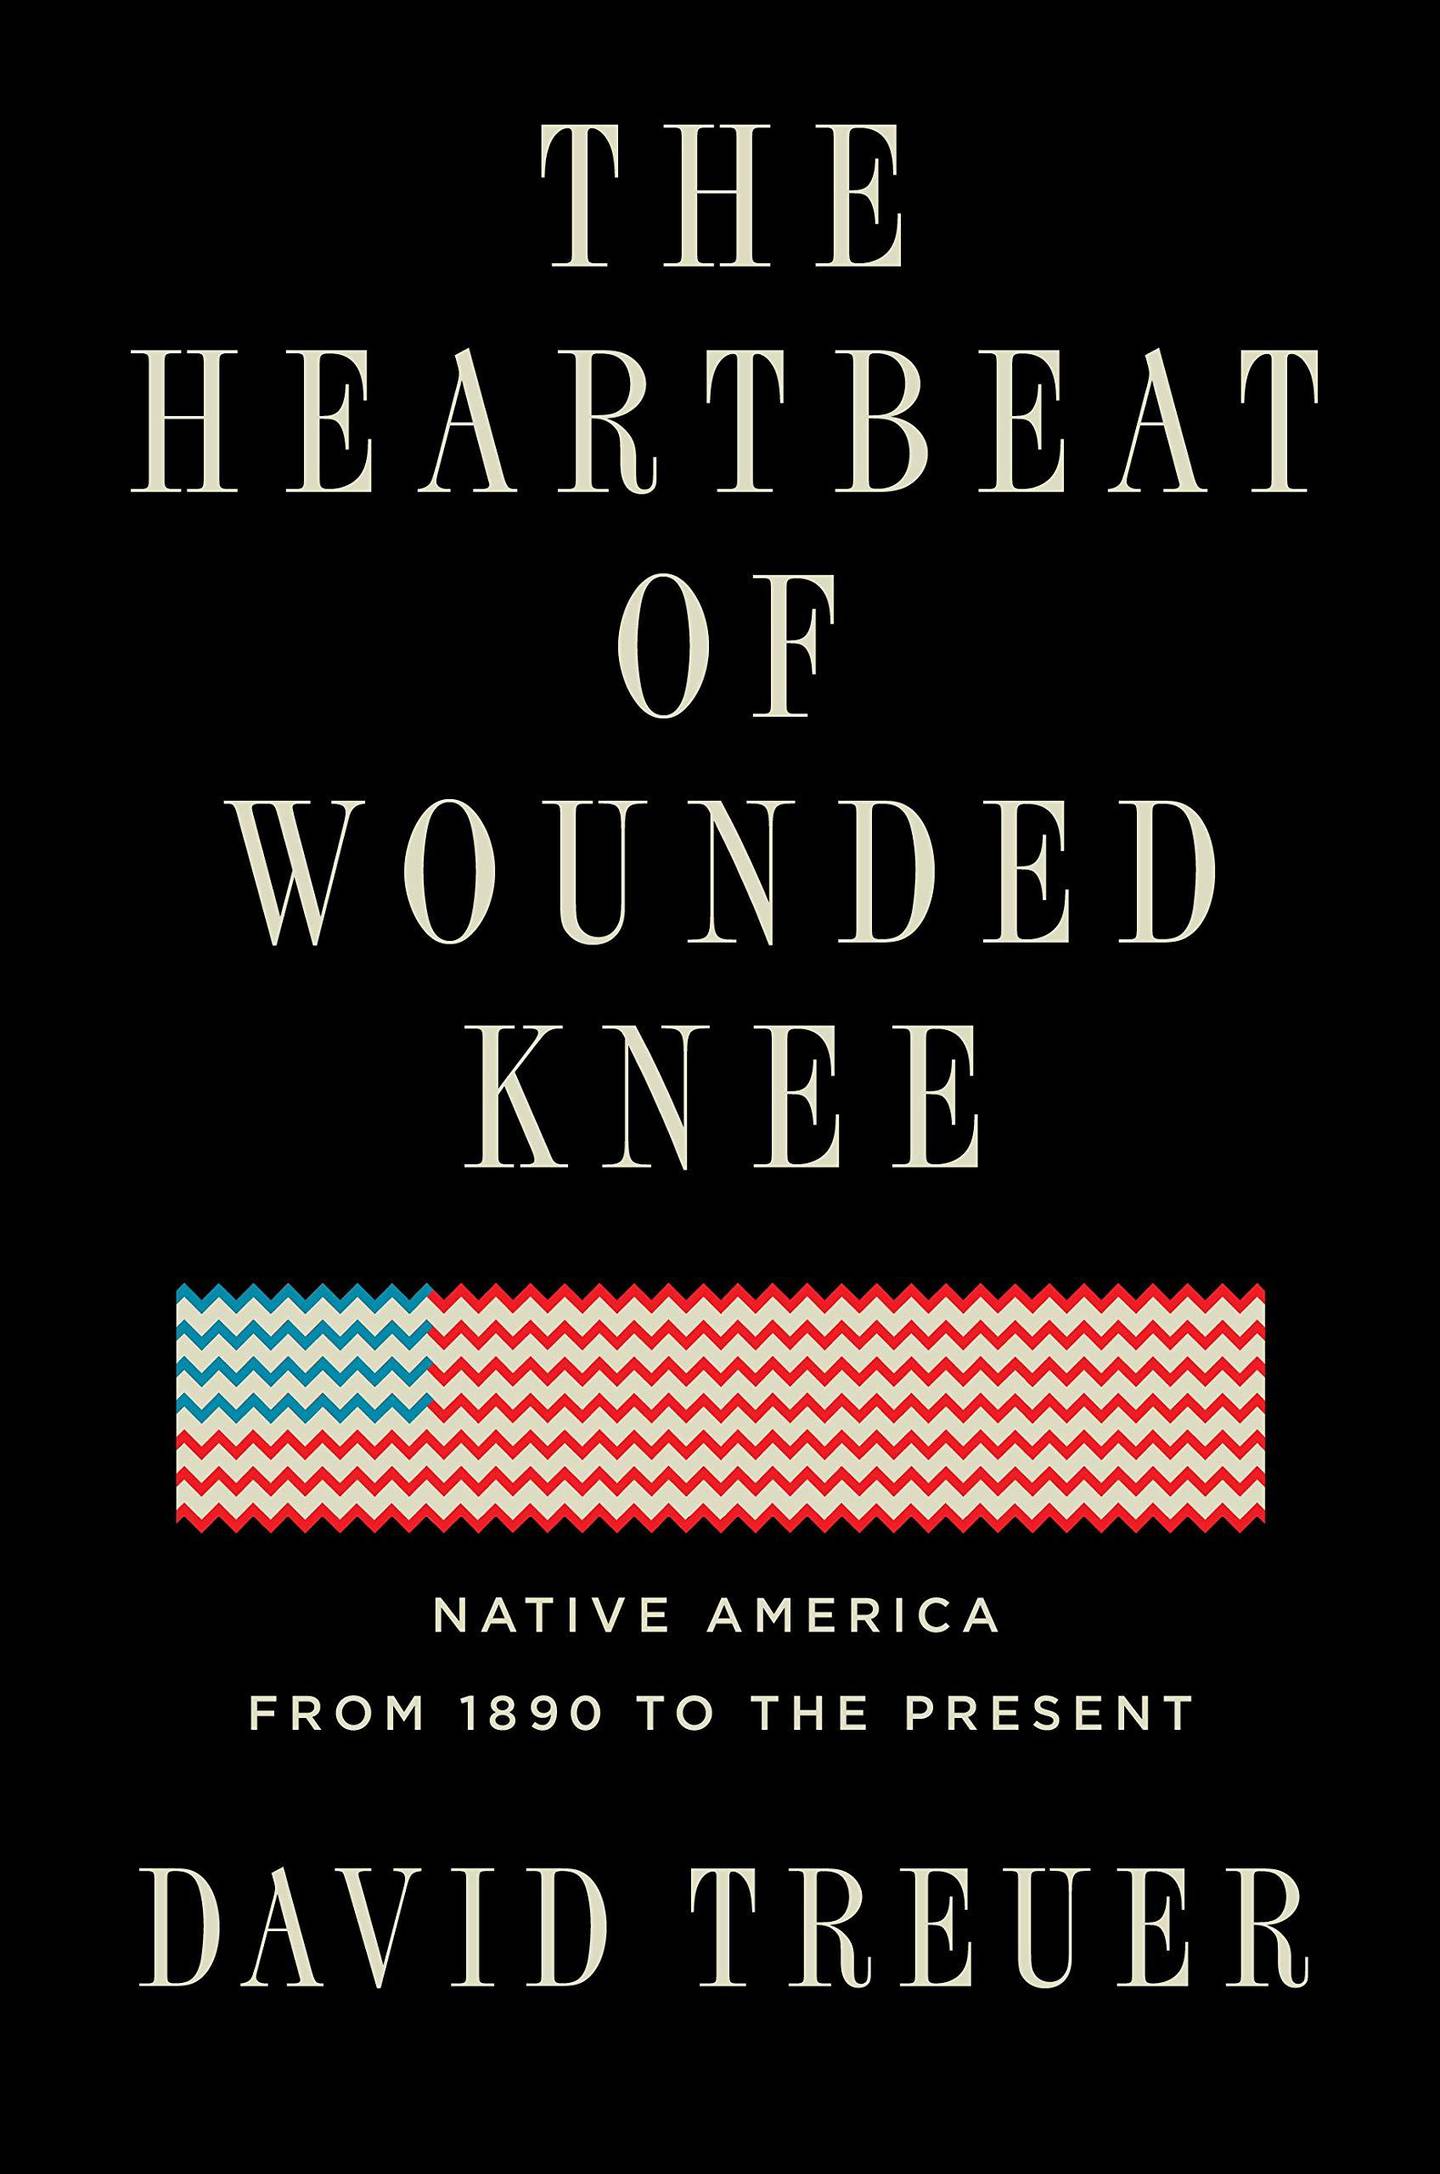 'The Heartbeat of Wounded Knee' by David Treuer.